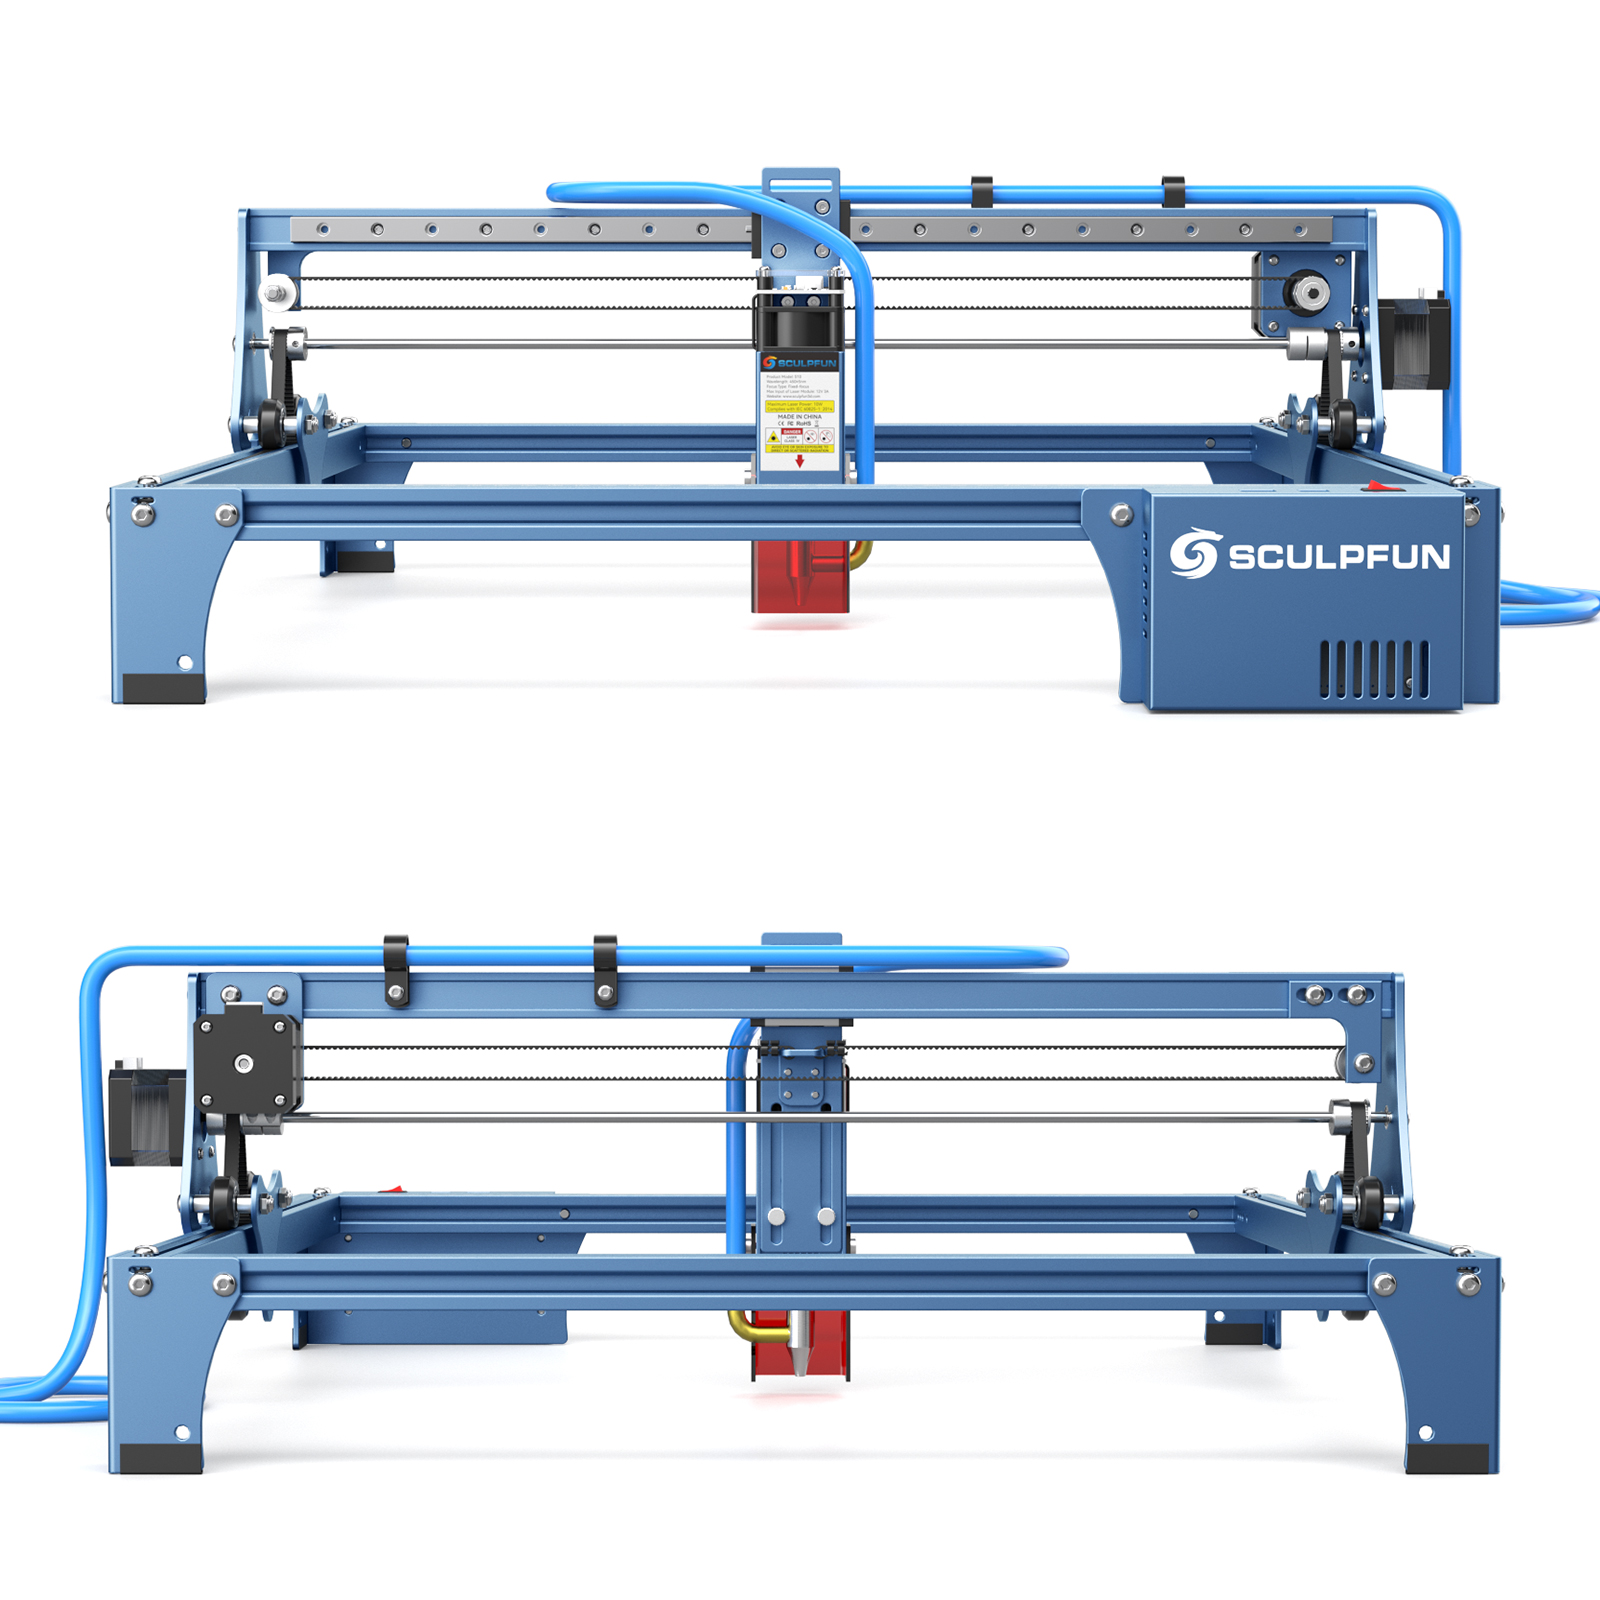 Find SCULPFUN S10 10W Laser Engraving Machine Laser Engraver Cutter 0 08mm High Precision Air Assist 32Bit Motherboard Upgraded Linear Rail Slide Full Metal CNC Engraving Area 410 400mm for Sale on Gipsybee.com with cryptocurrencies